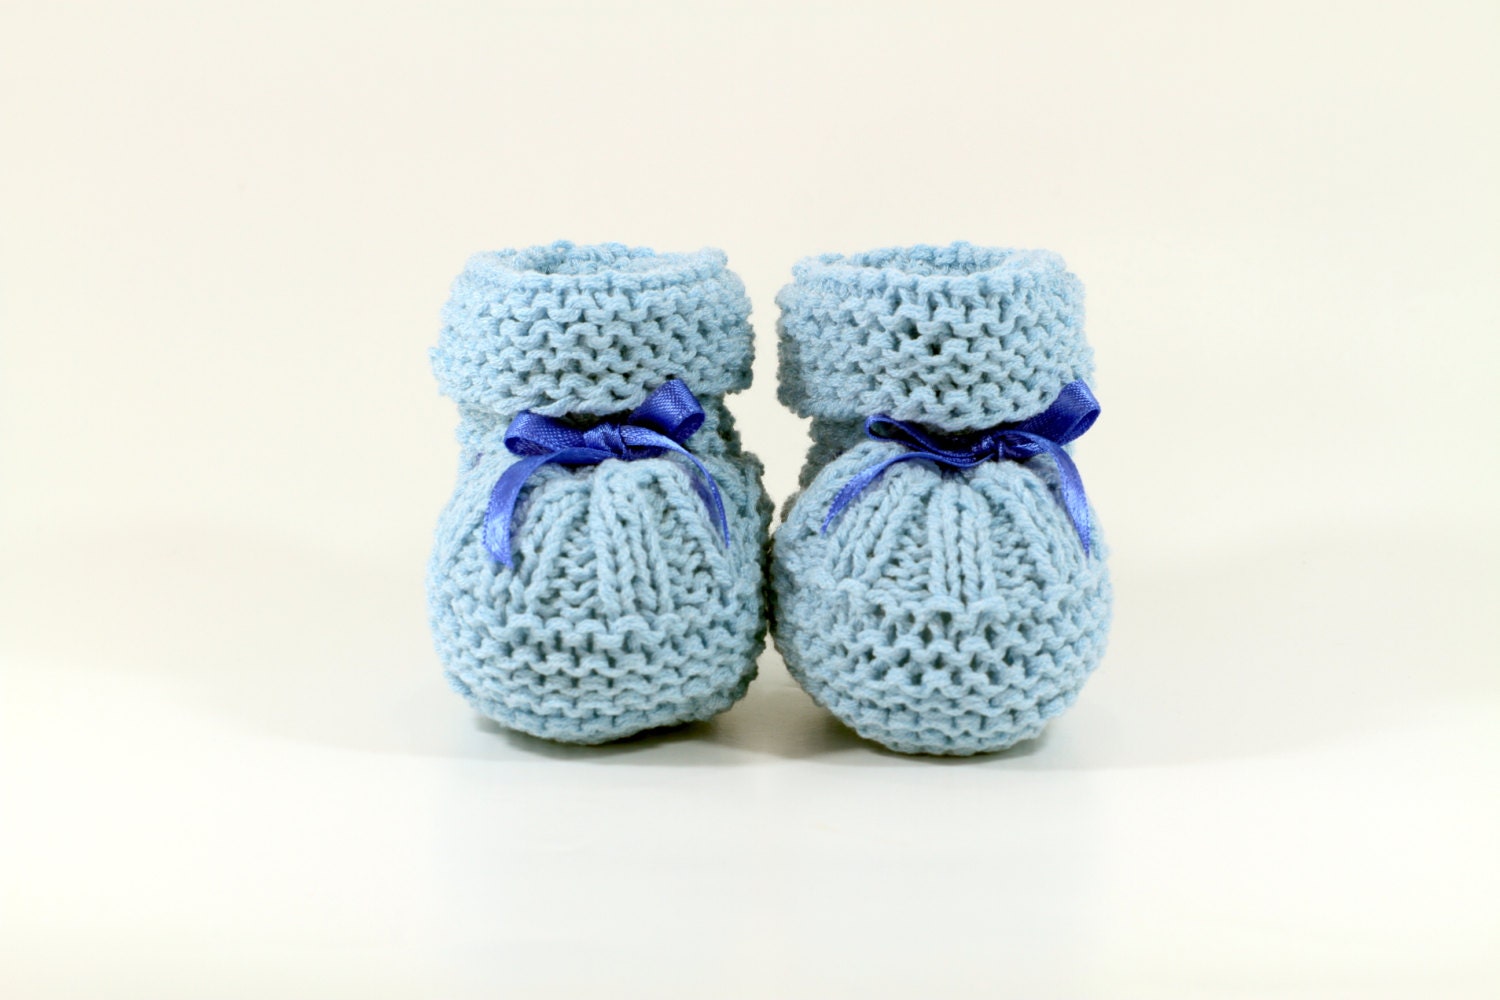 Knitted Baby Shoes Pattern With Ribbon in the Size 3 6 | Etsy